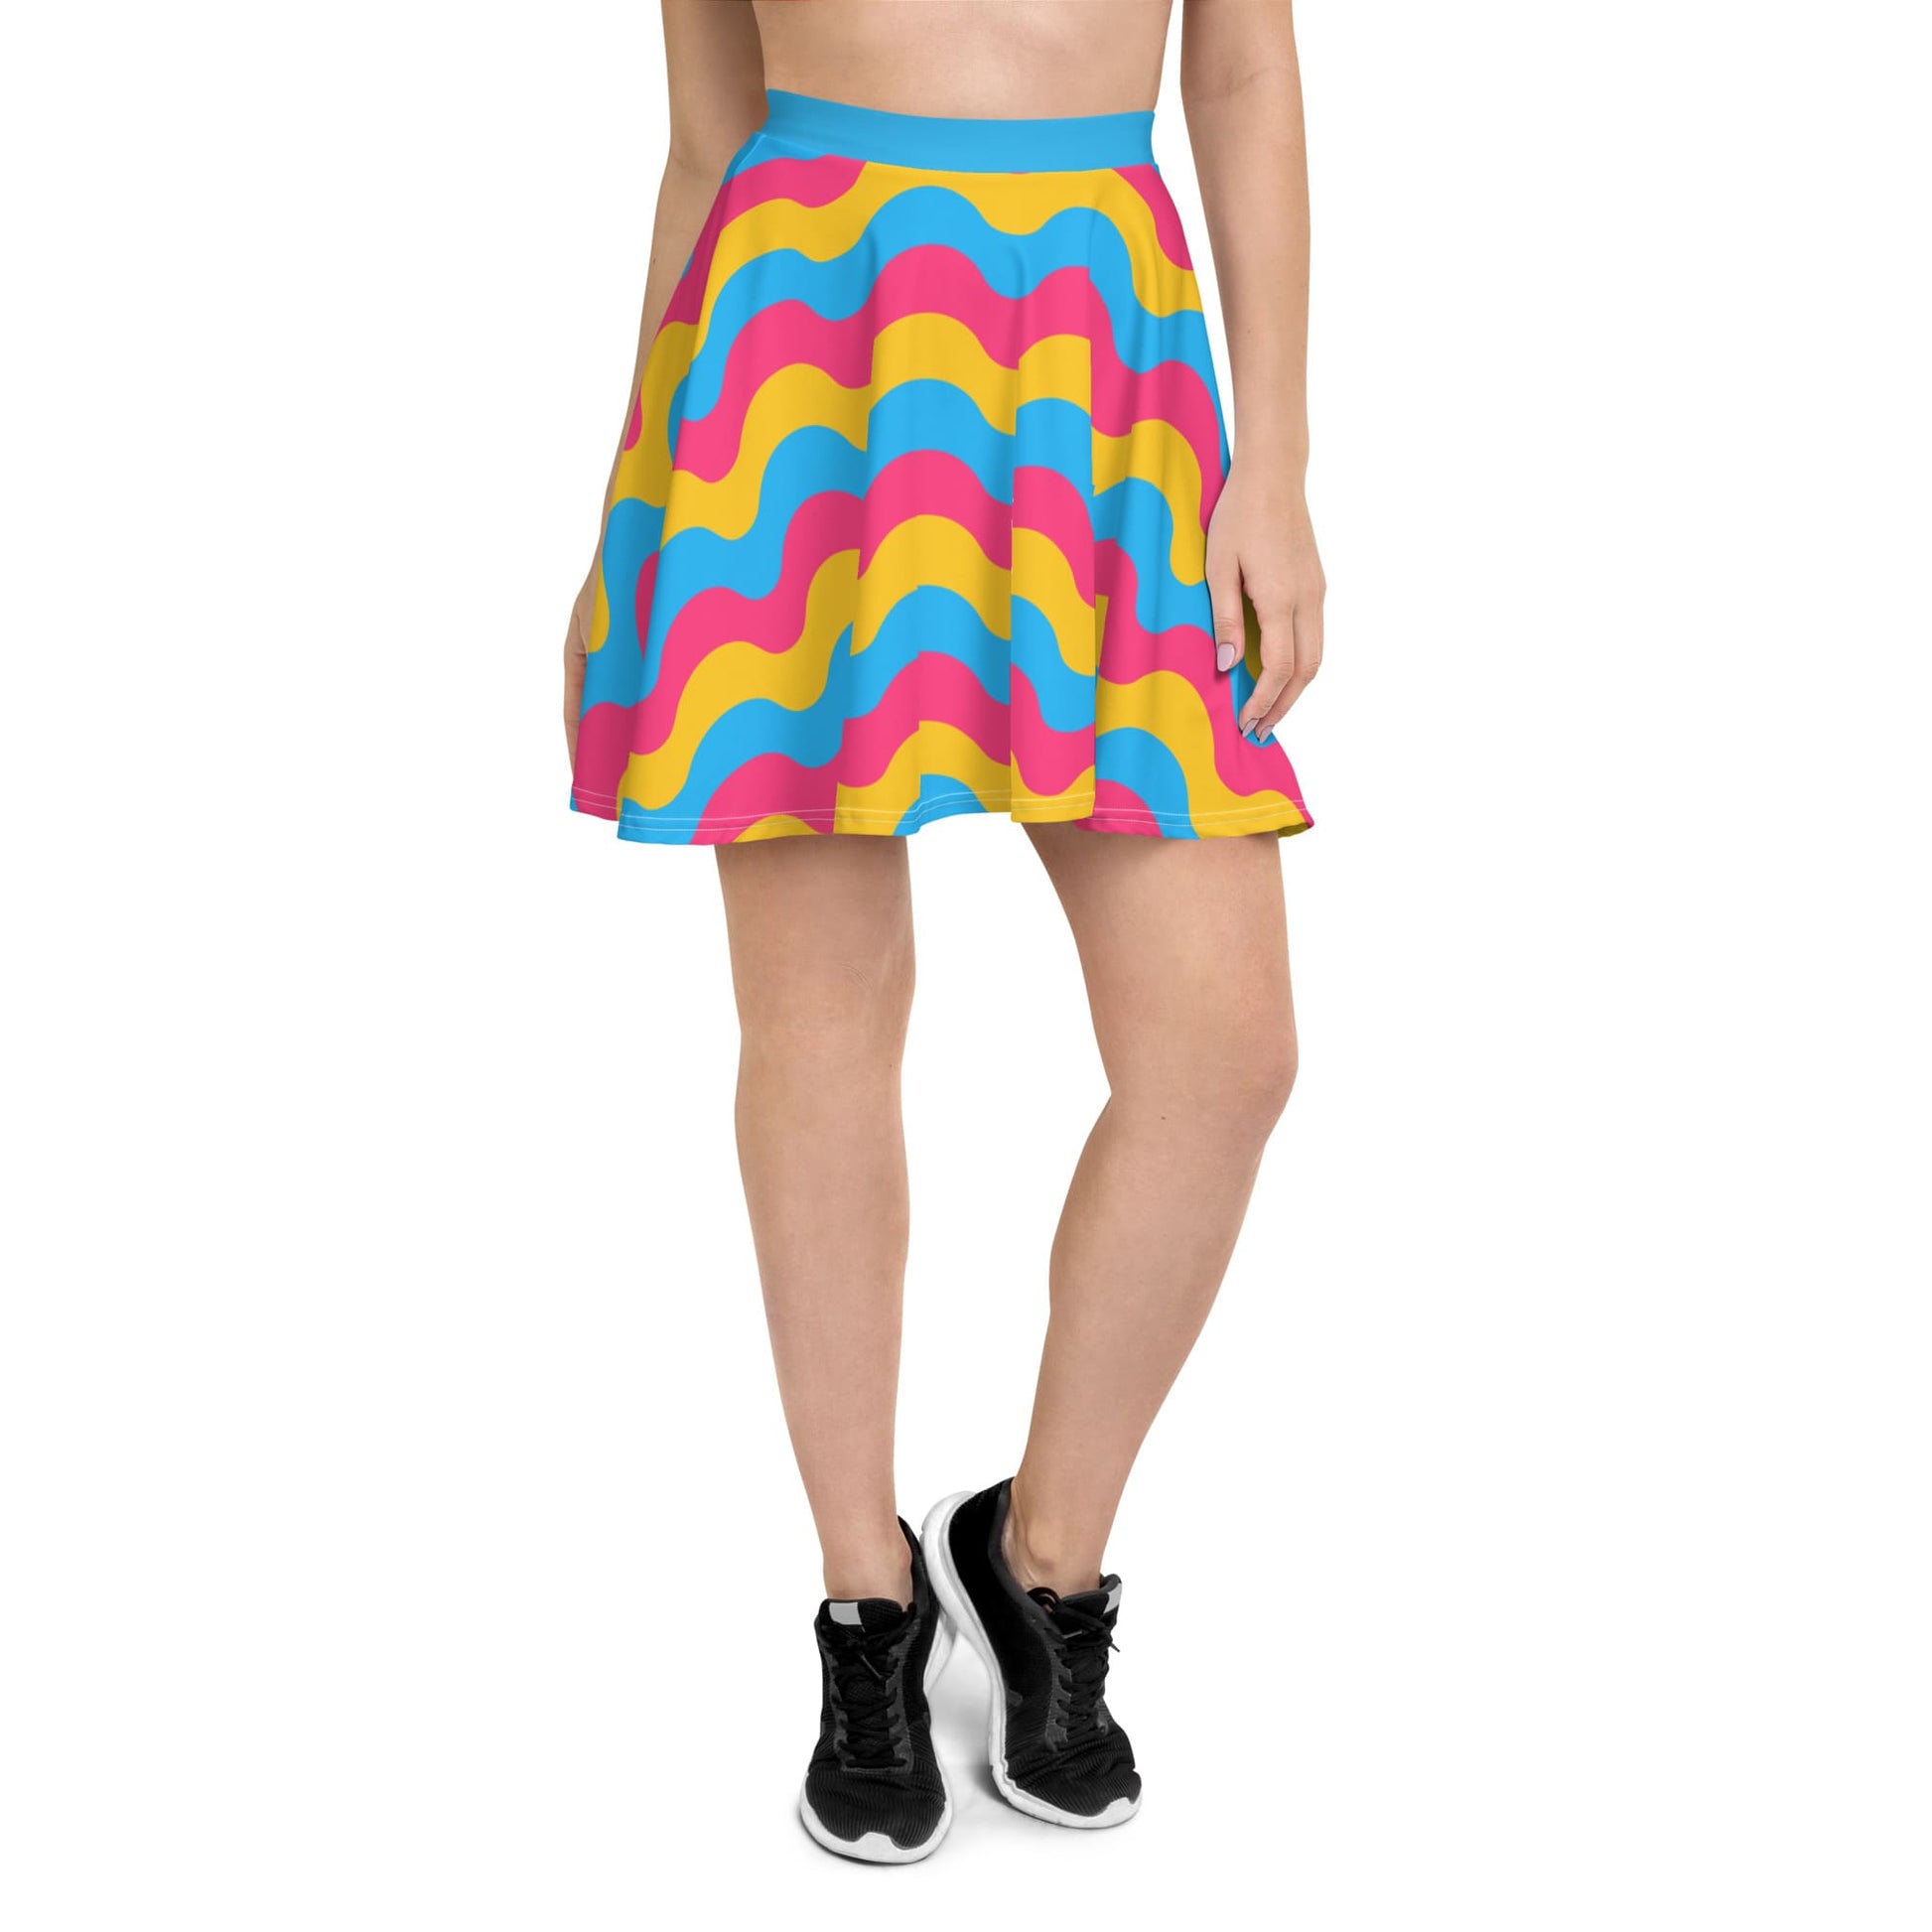 pansexual skirt, front